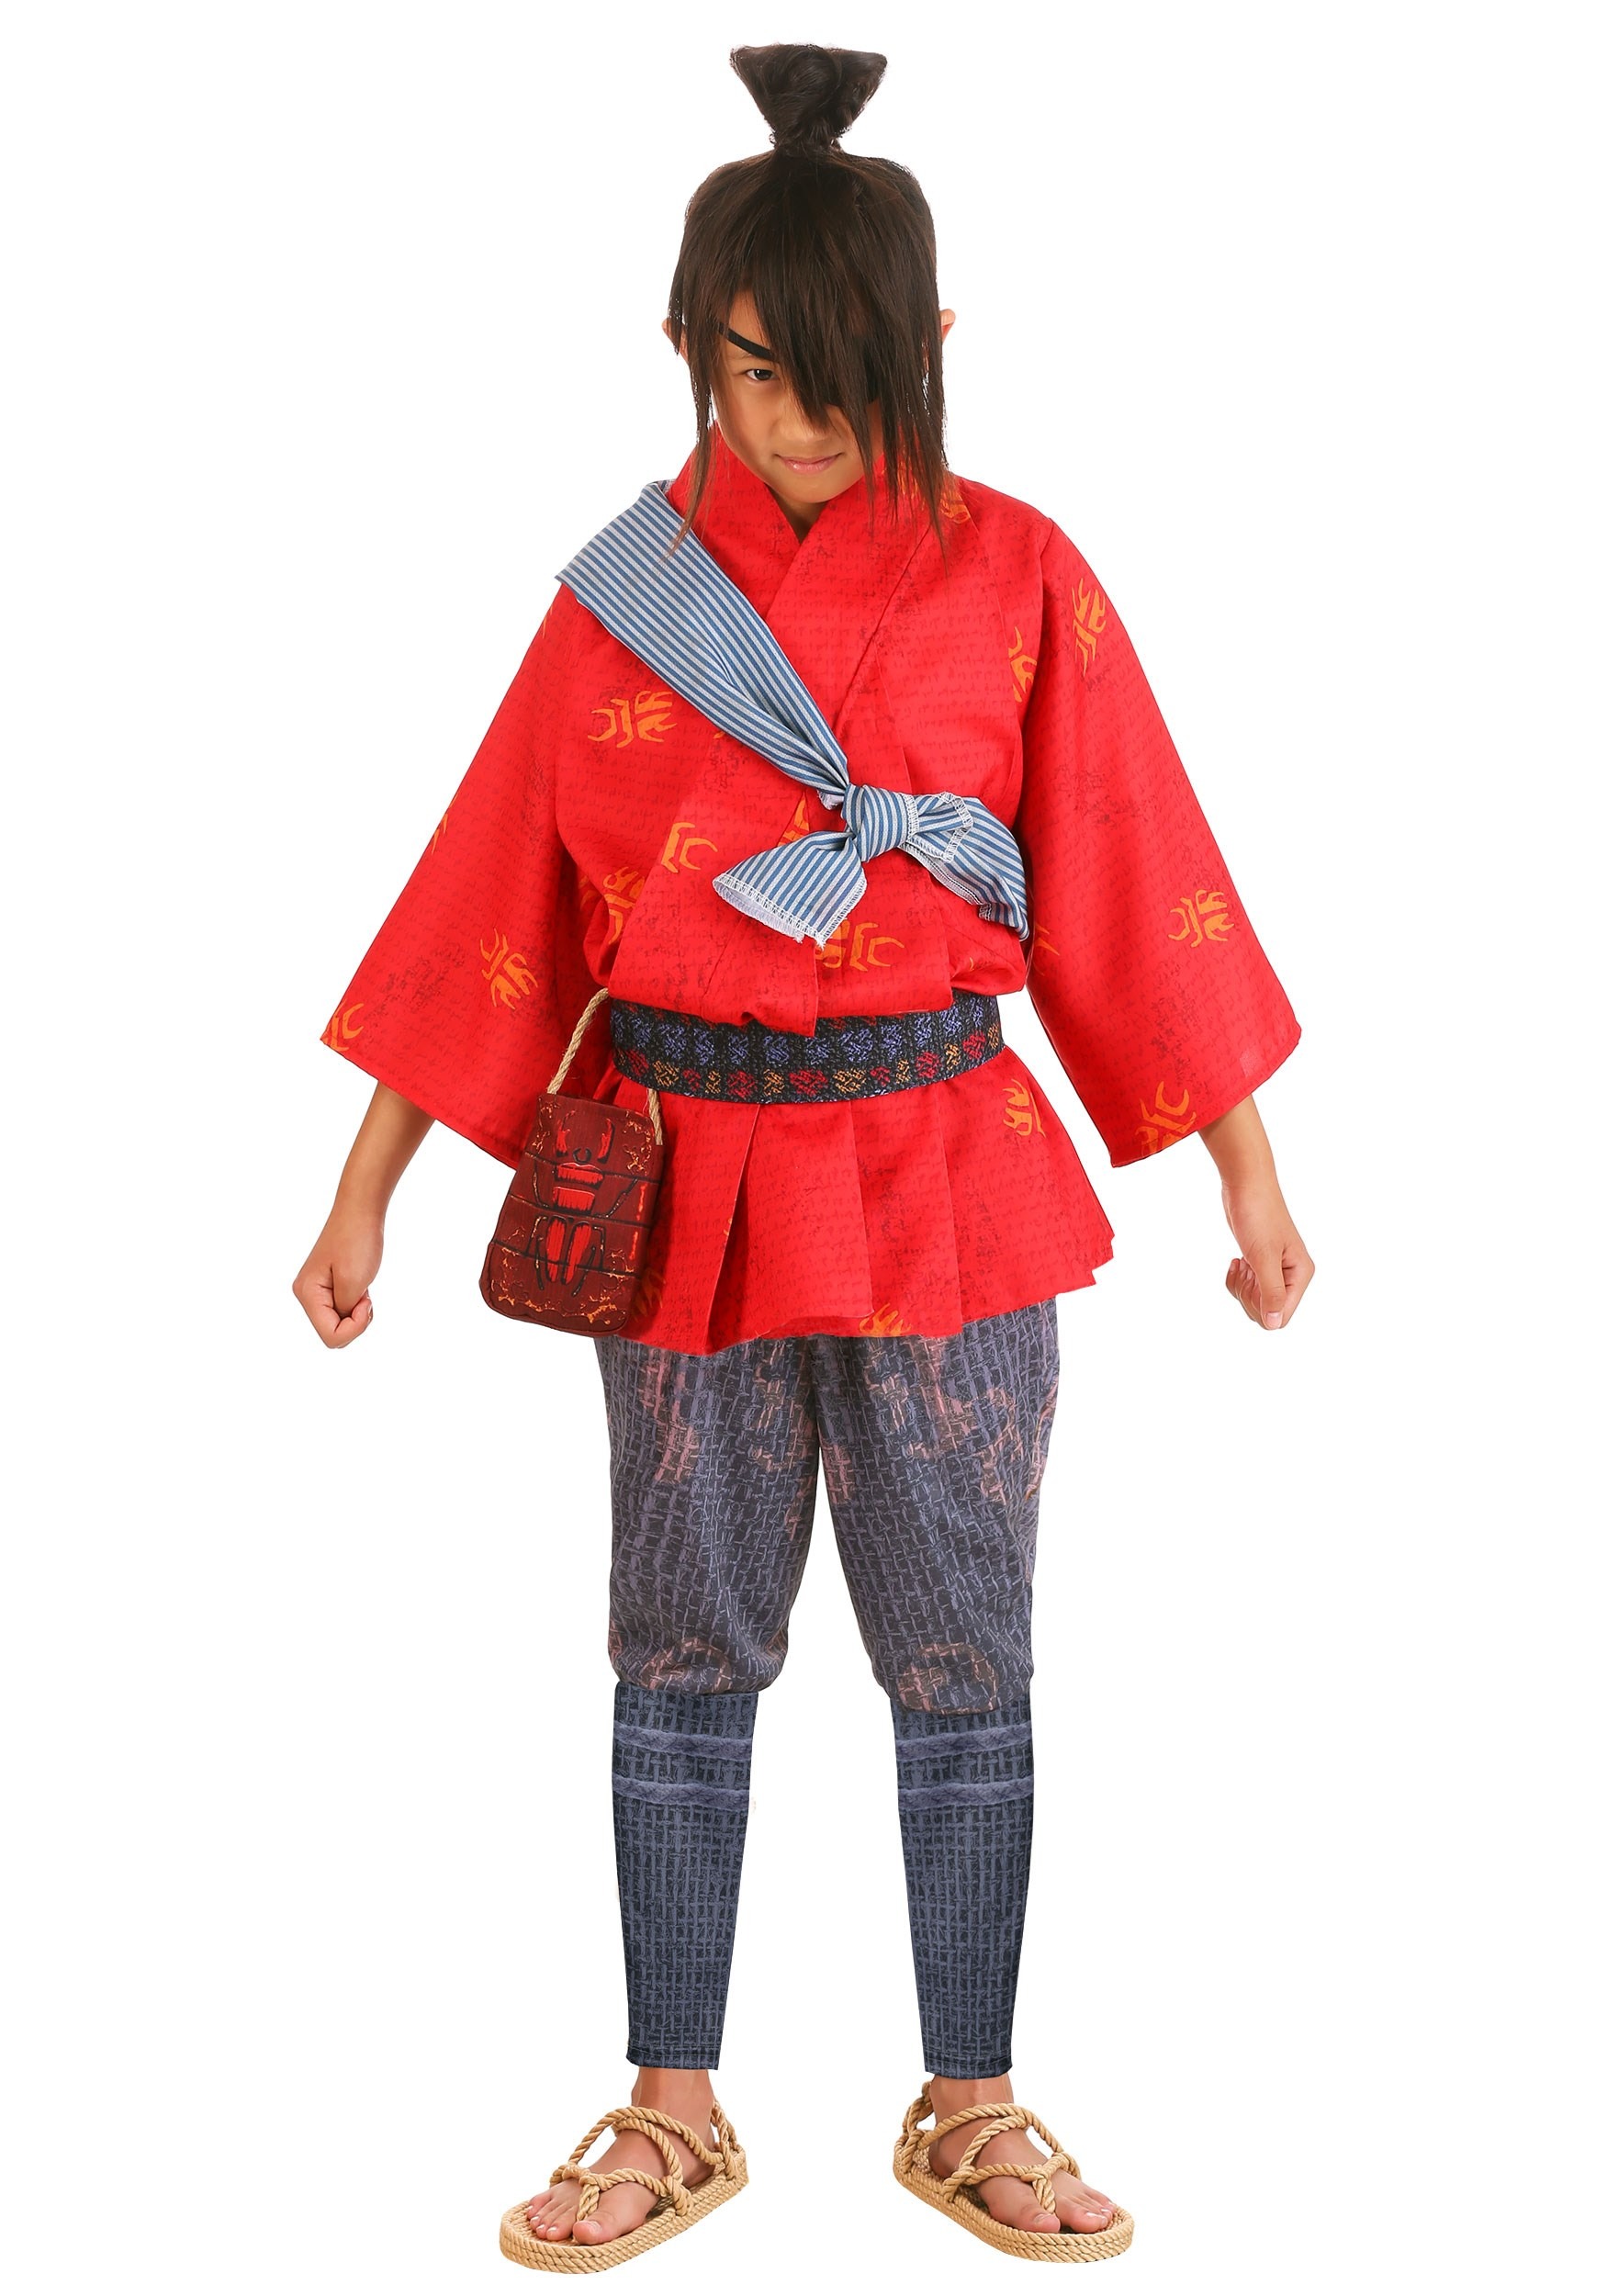 Kubo and the Two Strings Boys Costume